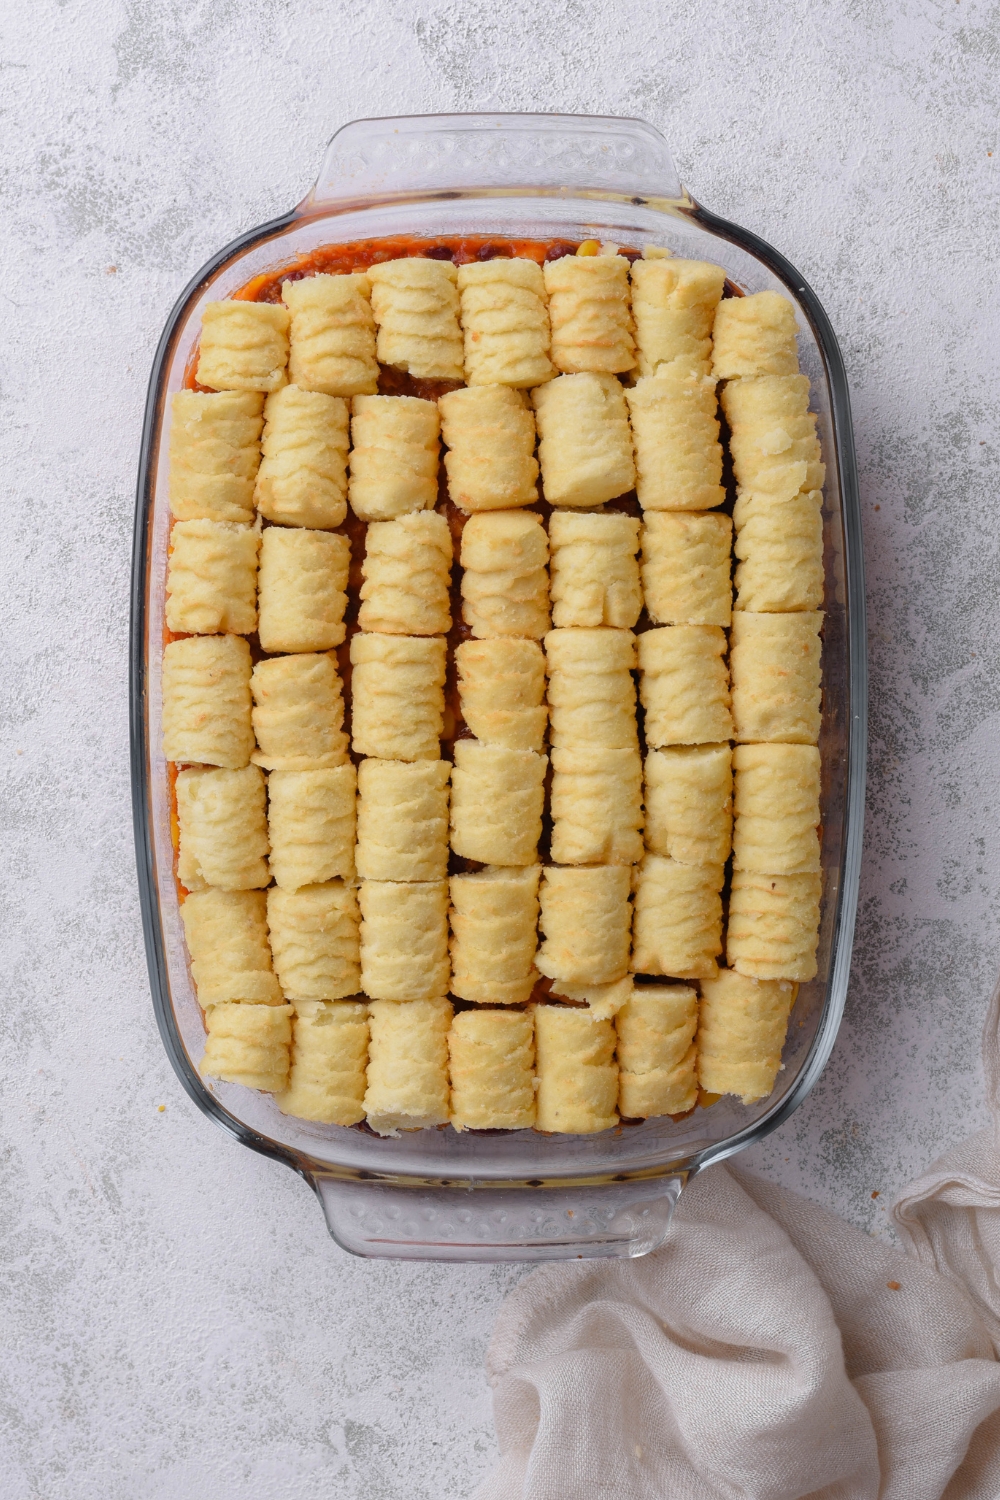 Tater tots arranged on a casserole filling in a baking dish on top of a grey counter.